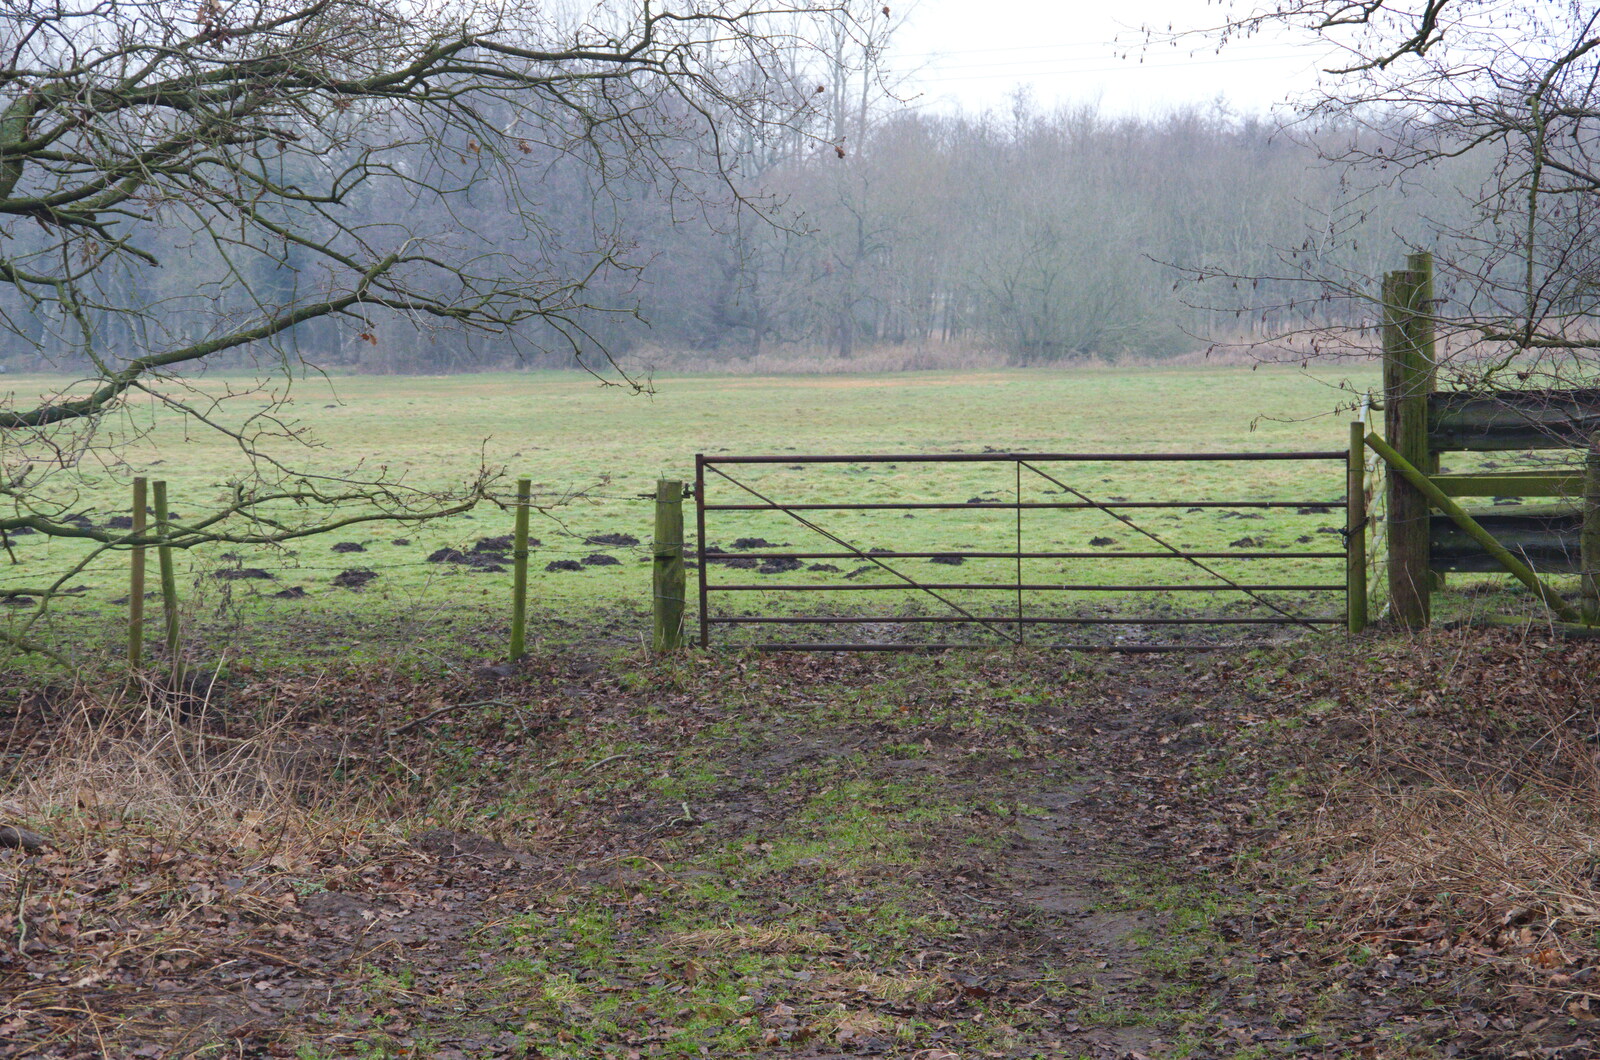 A six-bar gate to a misty field from New Year's Day on the Ling, Wortham, Suffolk - 1st January 2020